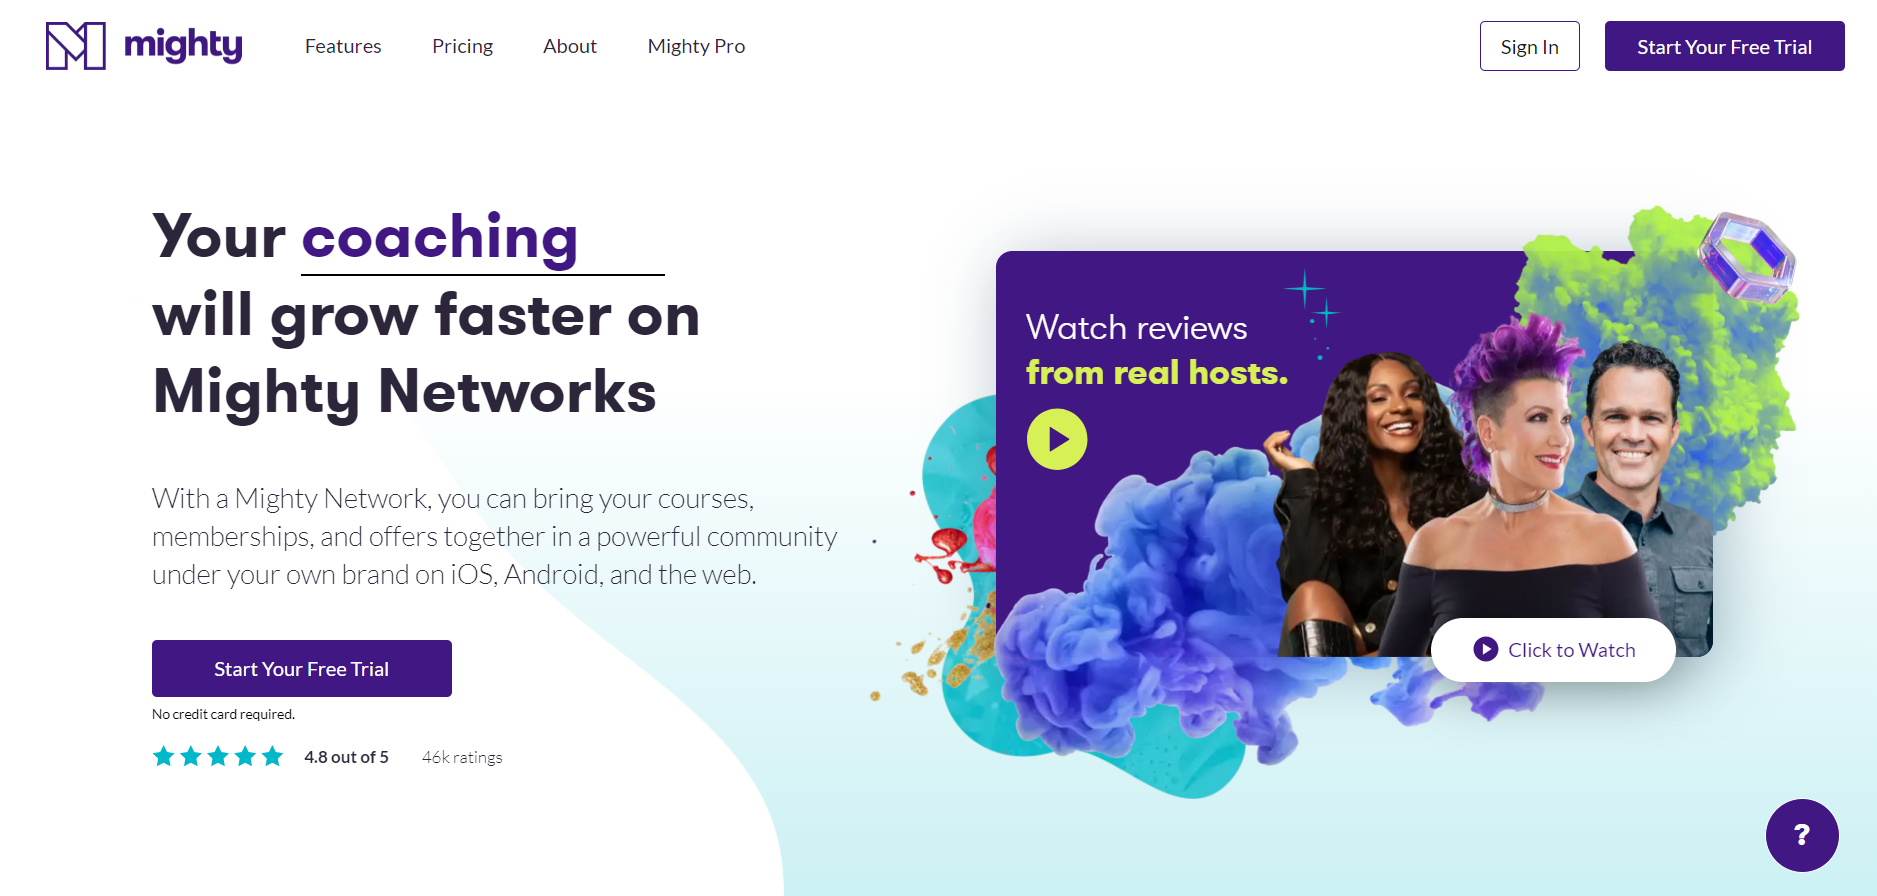 Mighty Networks - Build Online community